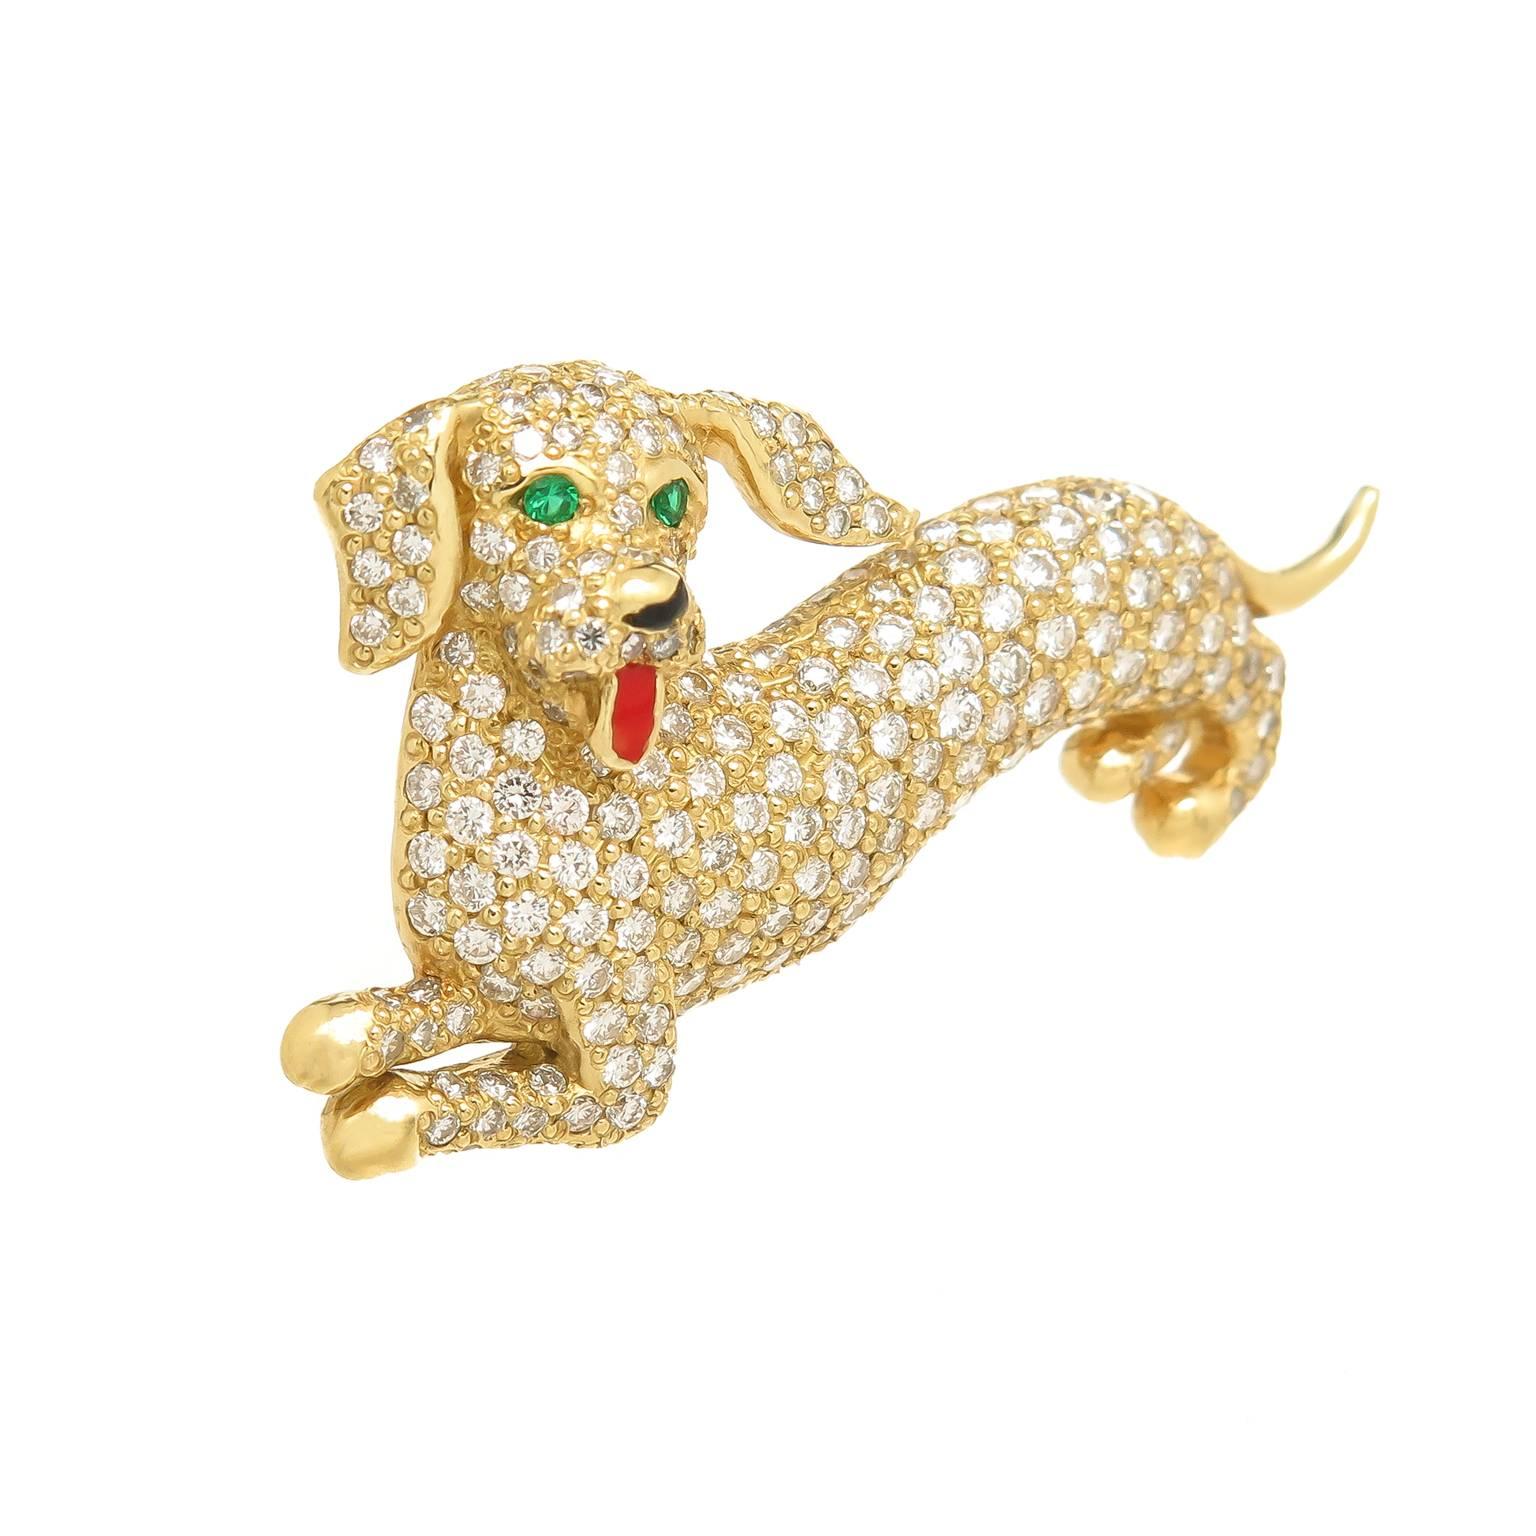 Circa 1980 18K Yellow Gold Whimsical puppy dog brooch, measuring 1 3/4 inch in length and set with Fine White, round Brilliant cut Diamonds totaling 2.50 carat and further detailed with Emerald eyes and a red enamel tongue. 